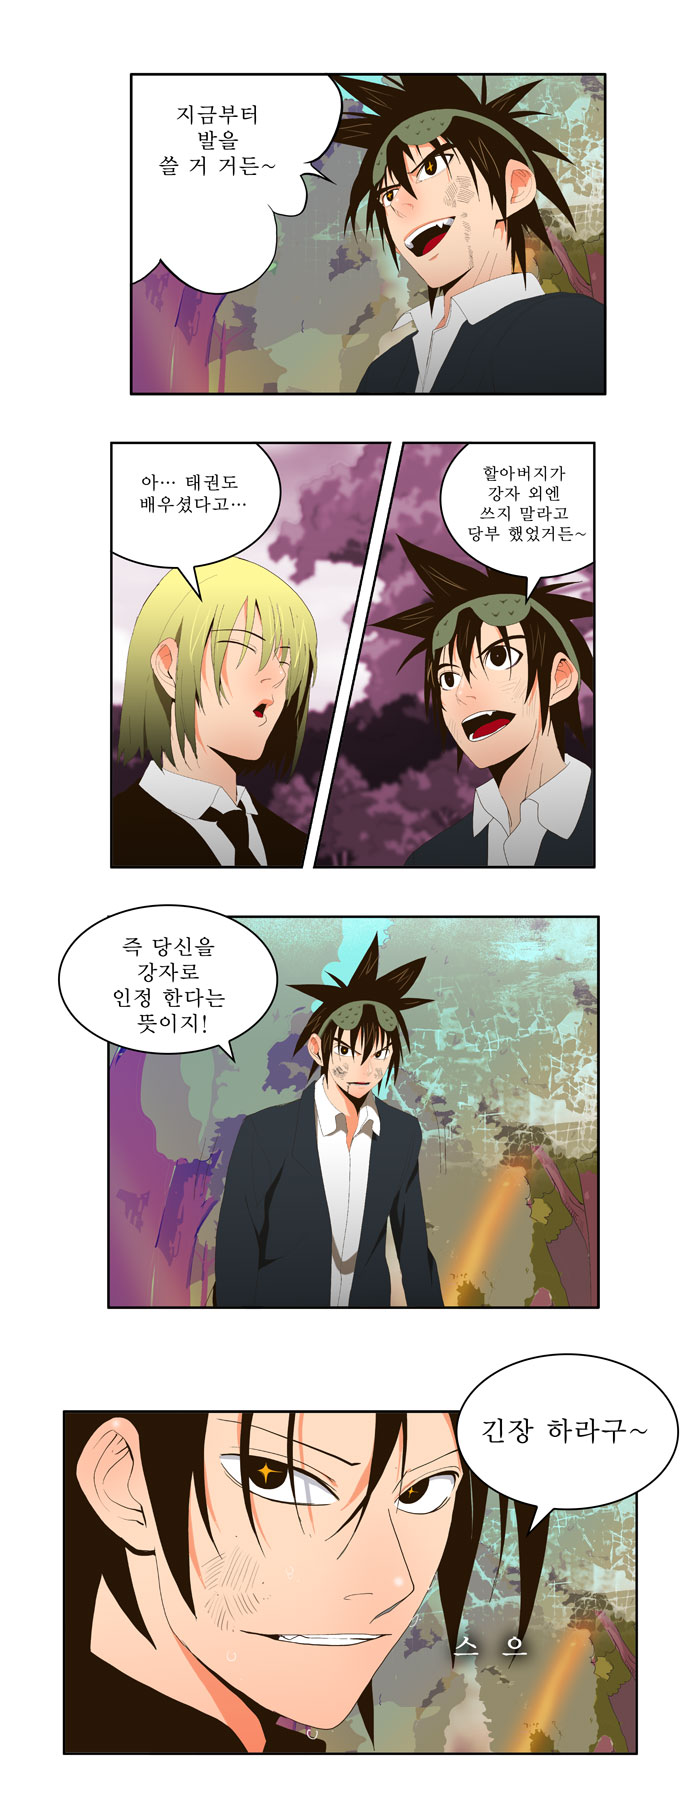 The God of High School - Chapter 4 - Page 2